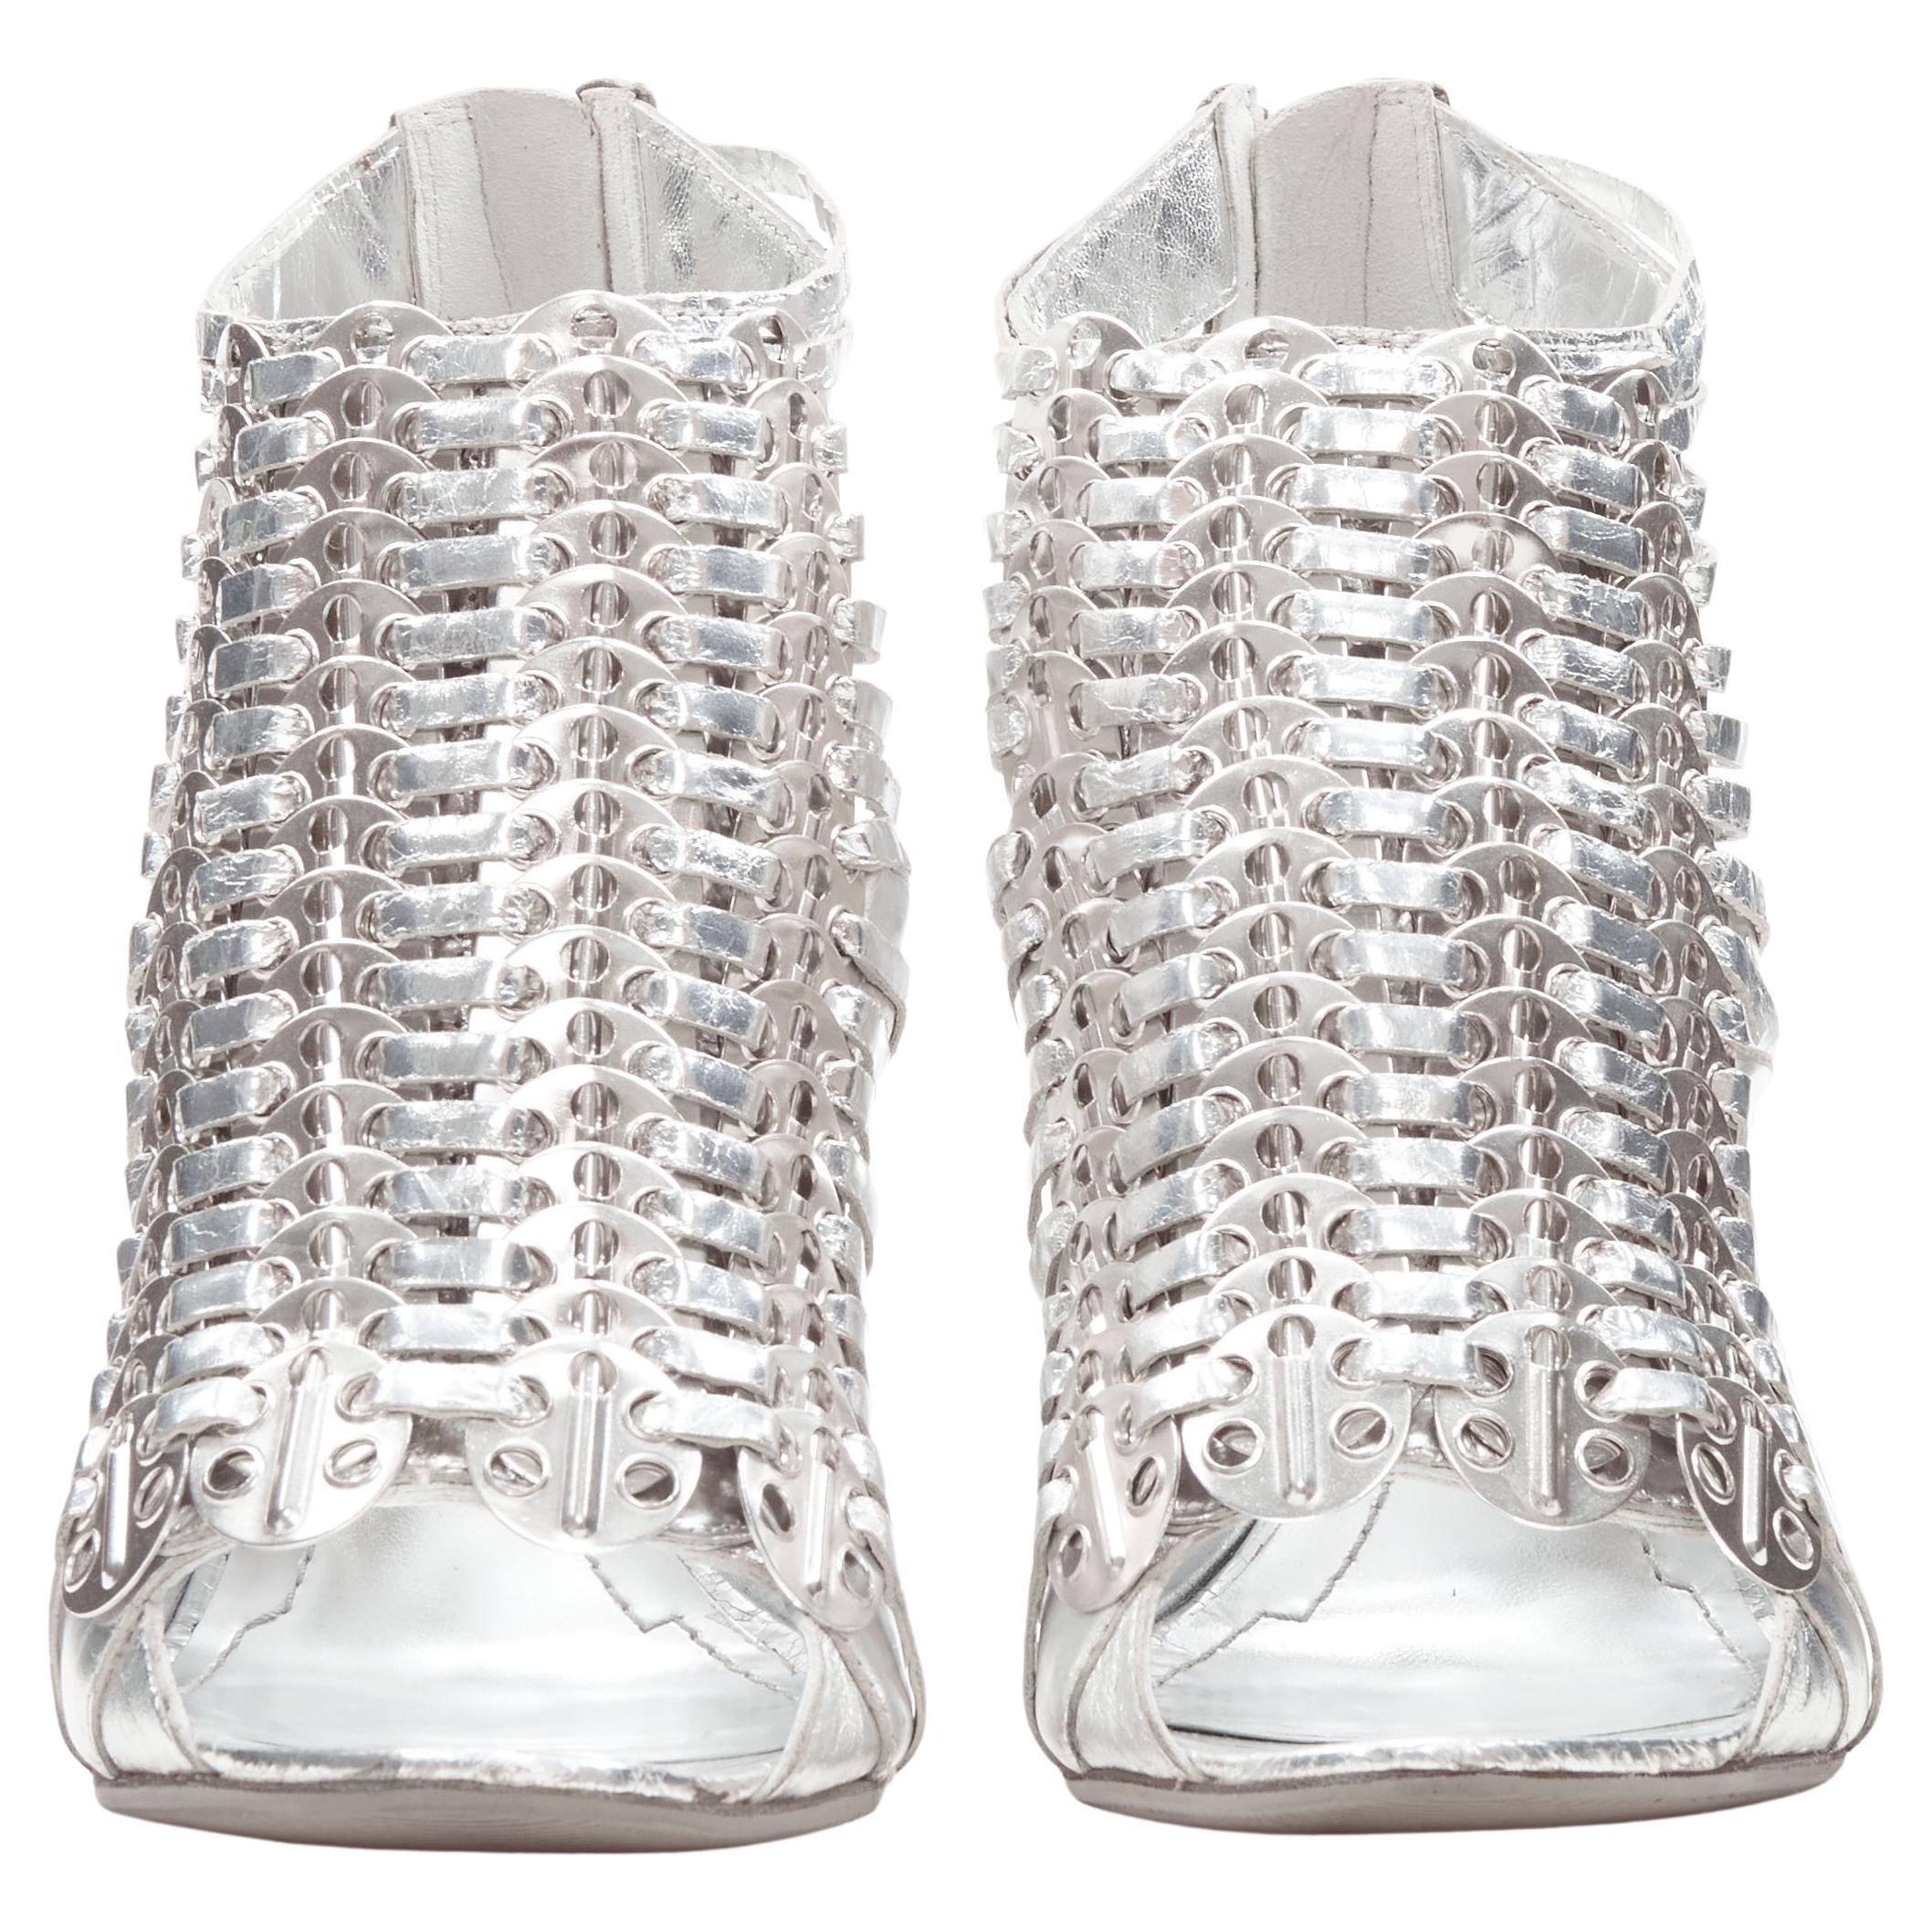 GIVENCHY metallic silver metal discs embellished strappy peep toe bootie EU36.5
Brand: Givenchy
Designer: Riccardo Tisci
Collection: 2010 
Material: Leather
Color: Silver
Pattern: Solid
Closure: Zip
Extra Detail: Wrinkled leather. Metal disc